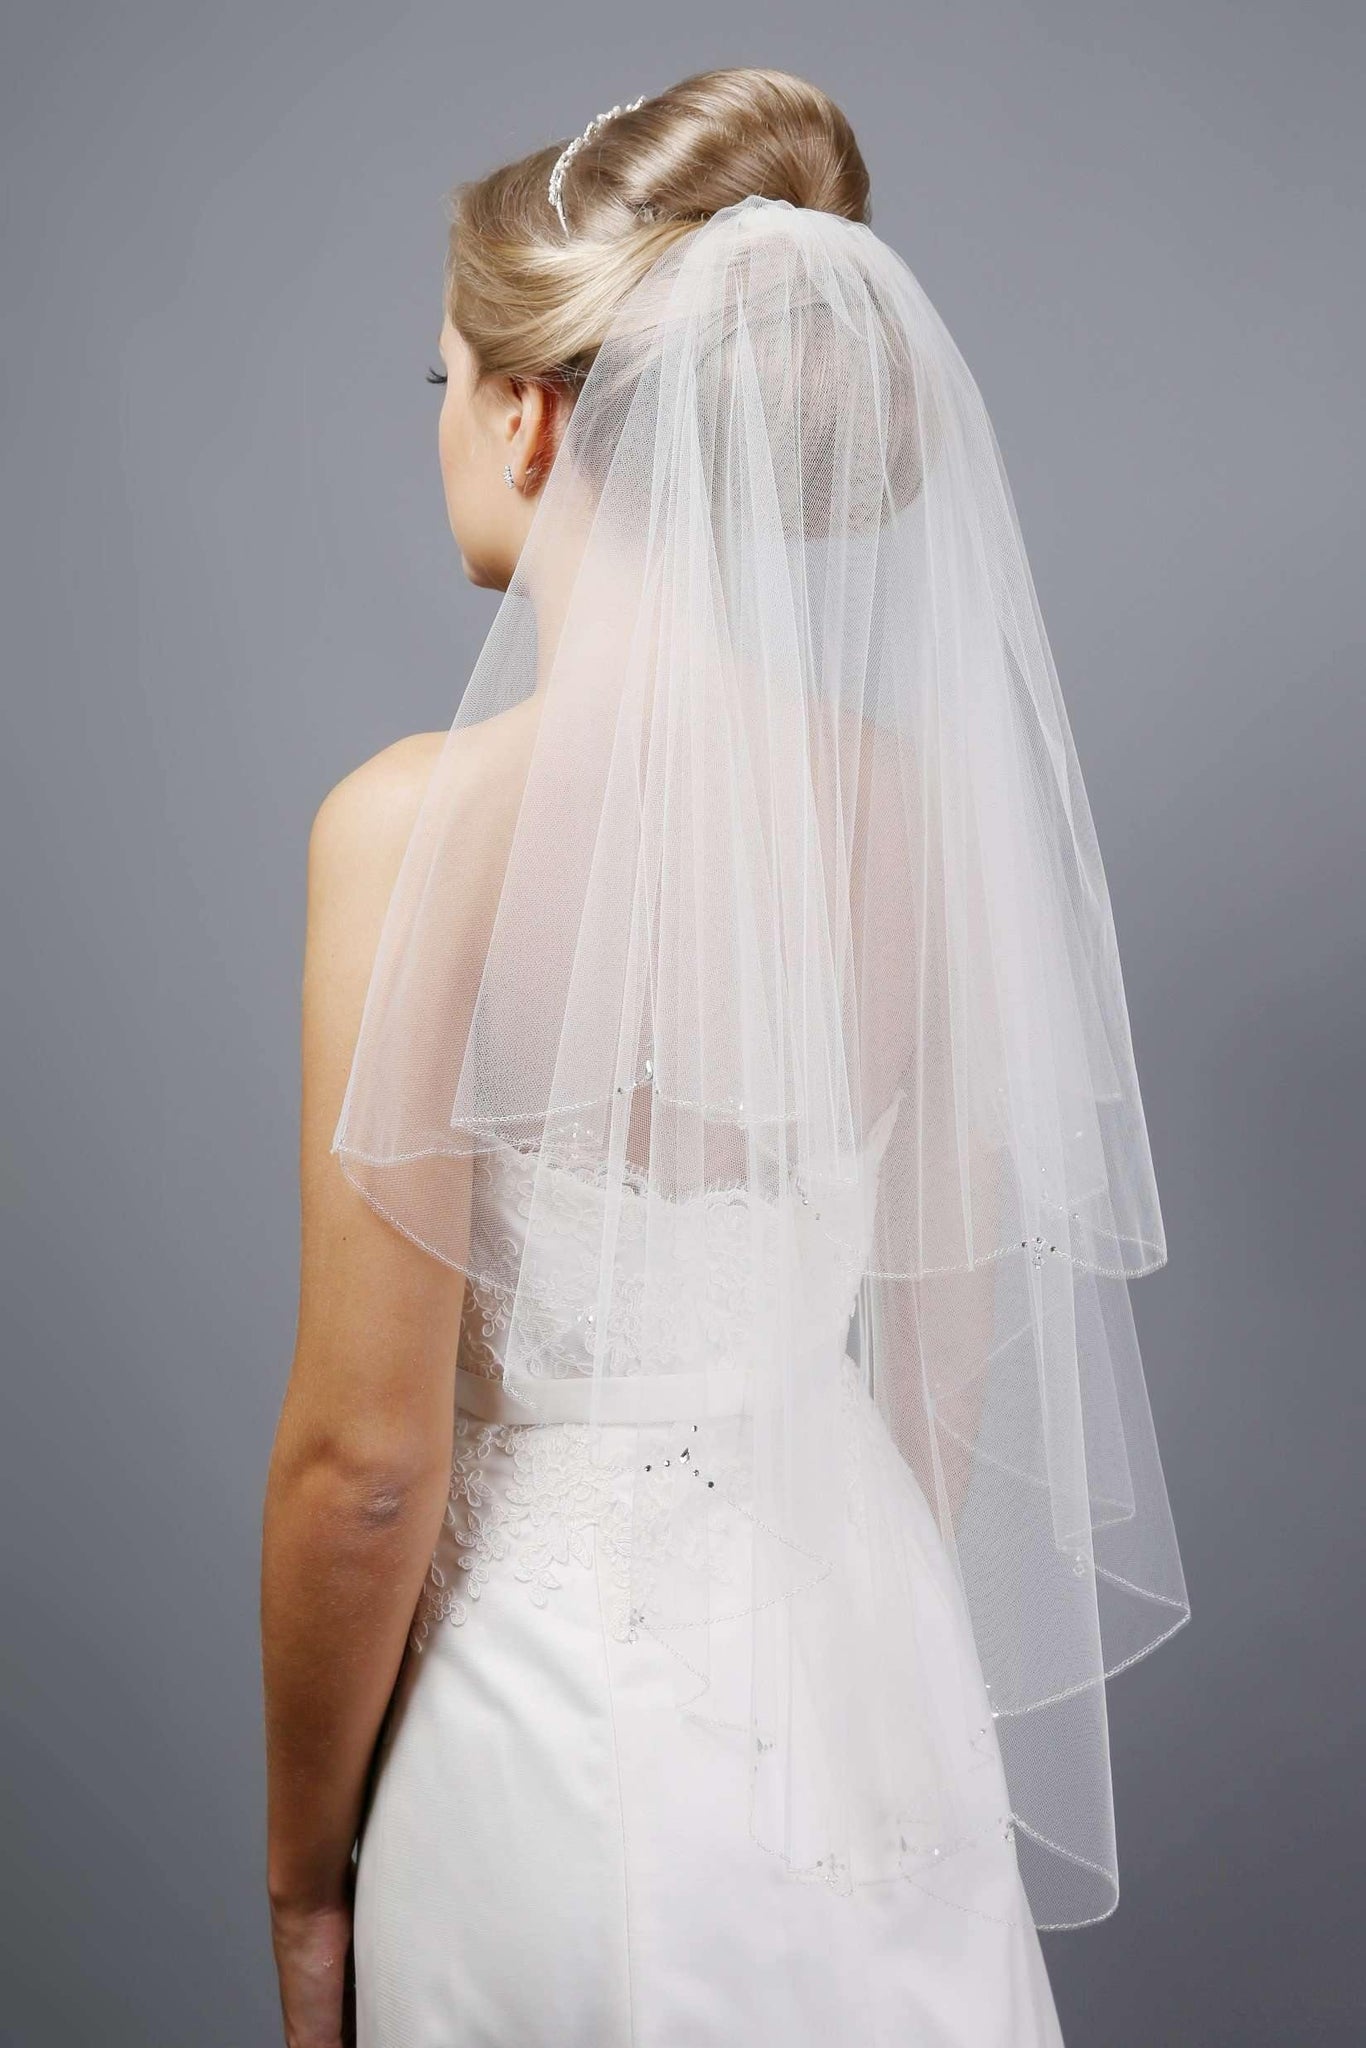 ROISIN - EMBROIDERED EDGE VEIL - 72" - Adore Bridal and Occasion Wear